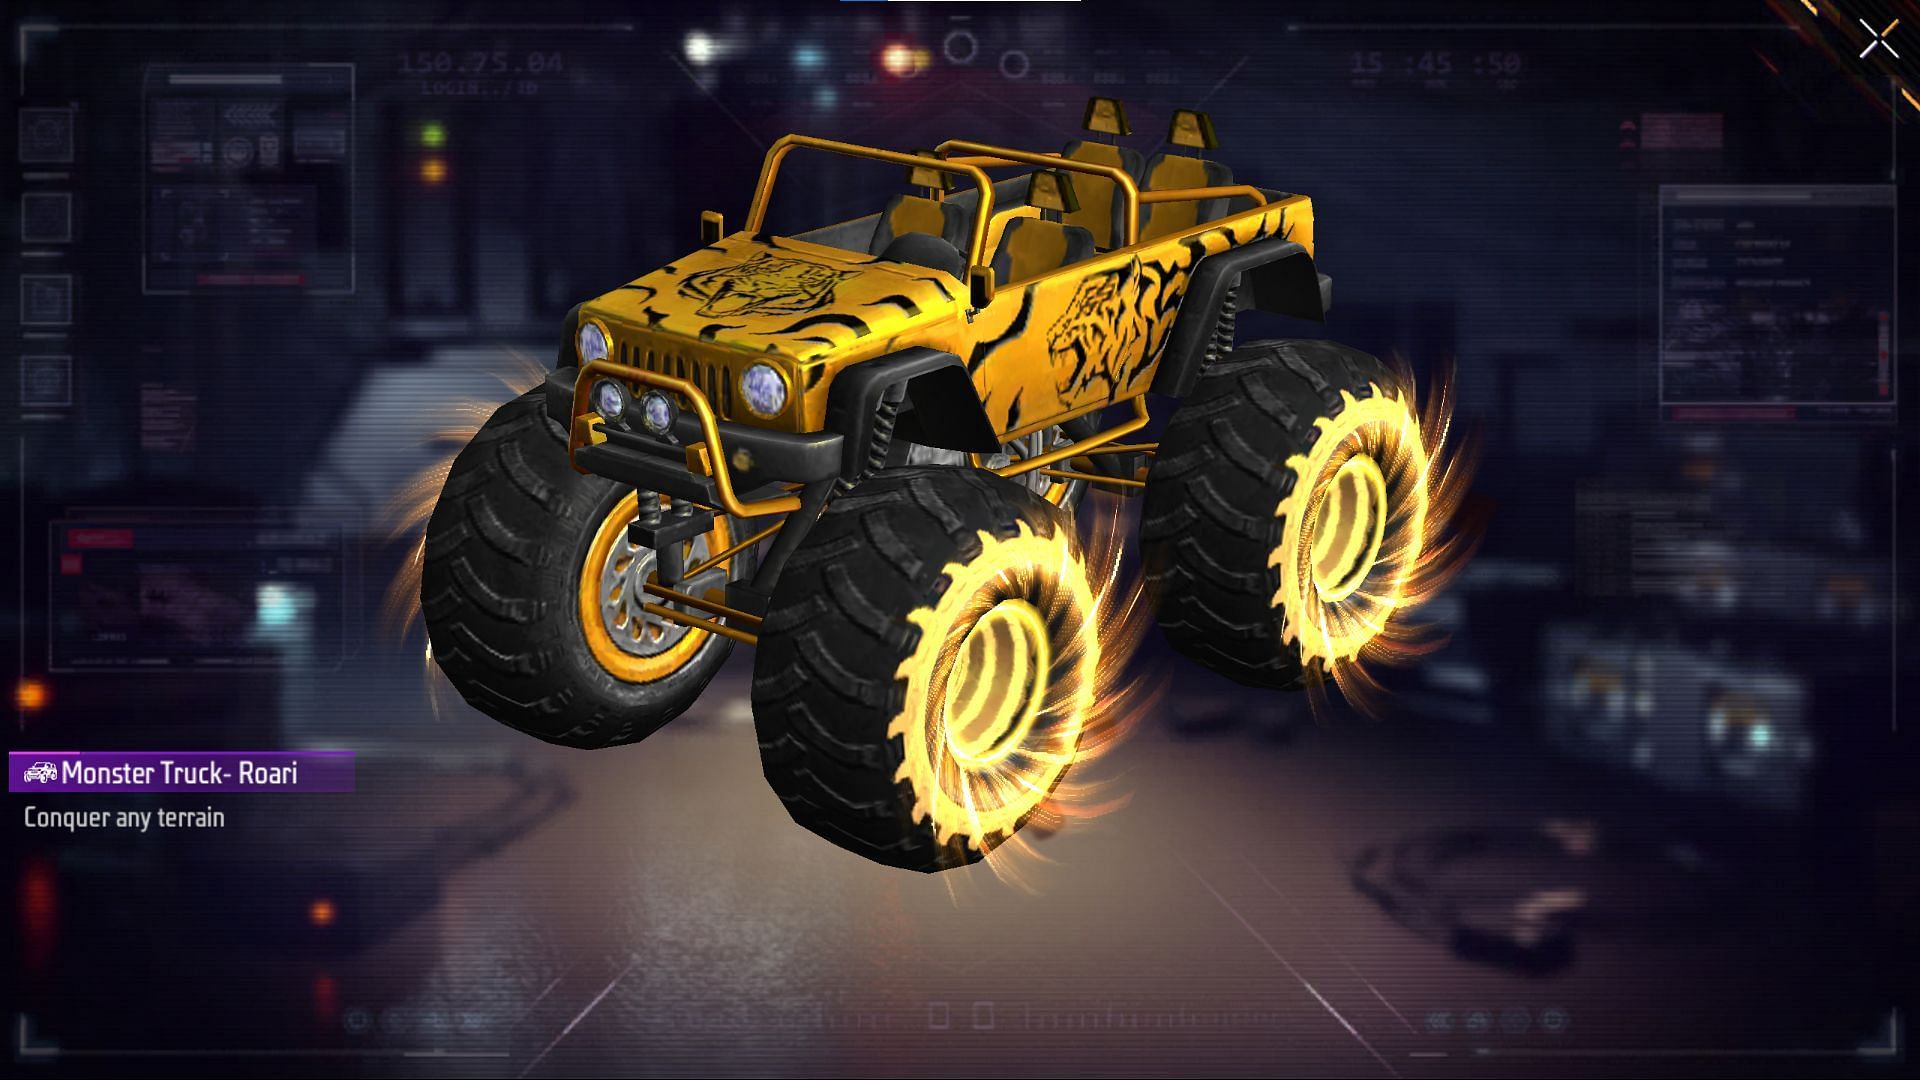 You can get a free Monster Truck skin through the login event Image via Garena)